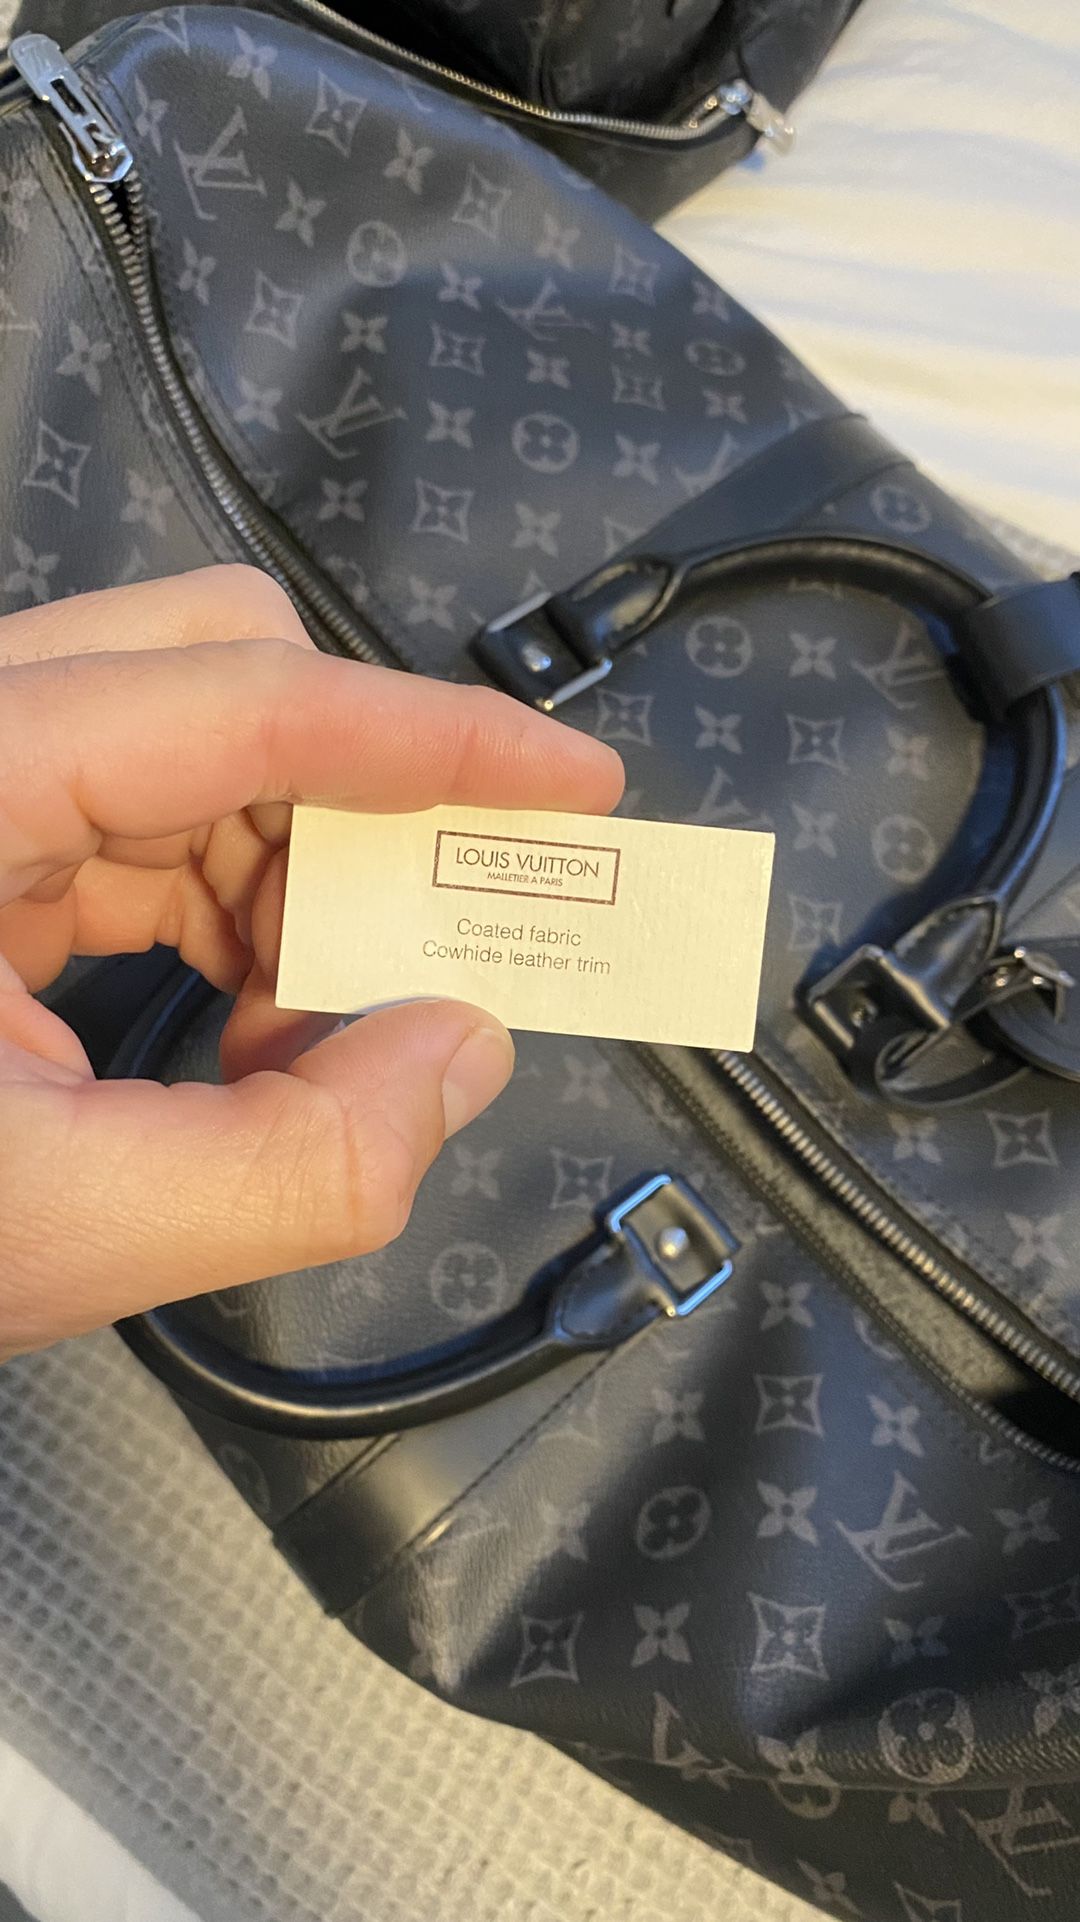 Louis Vuitton 55 Keepall Bag for Sale in Fort Lauderdale, FL - OfferUp